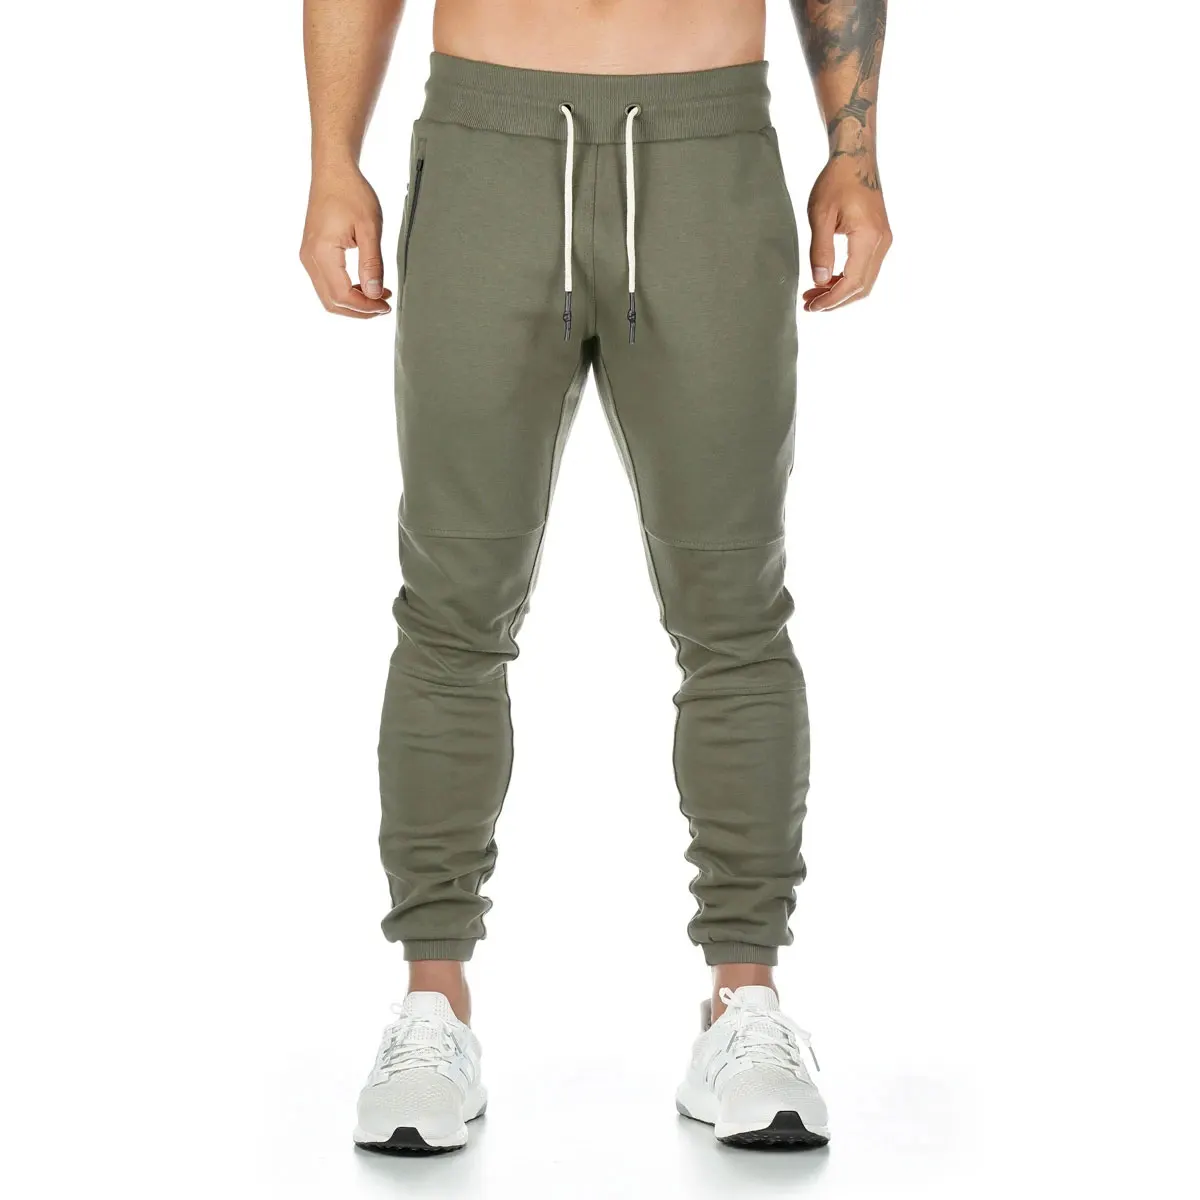 Wholesale Custom Your Own Brand Stack Sweatpants Sweatsuit Joggers ...